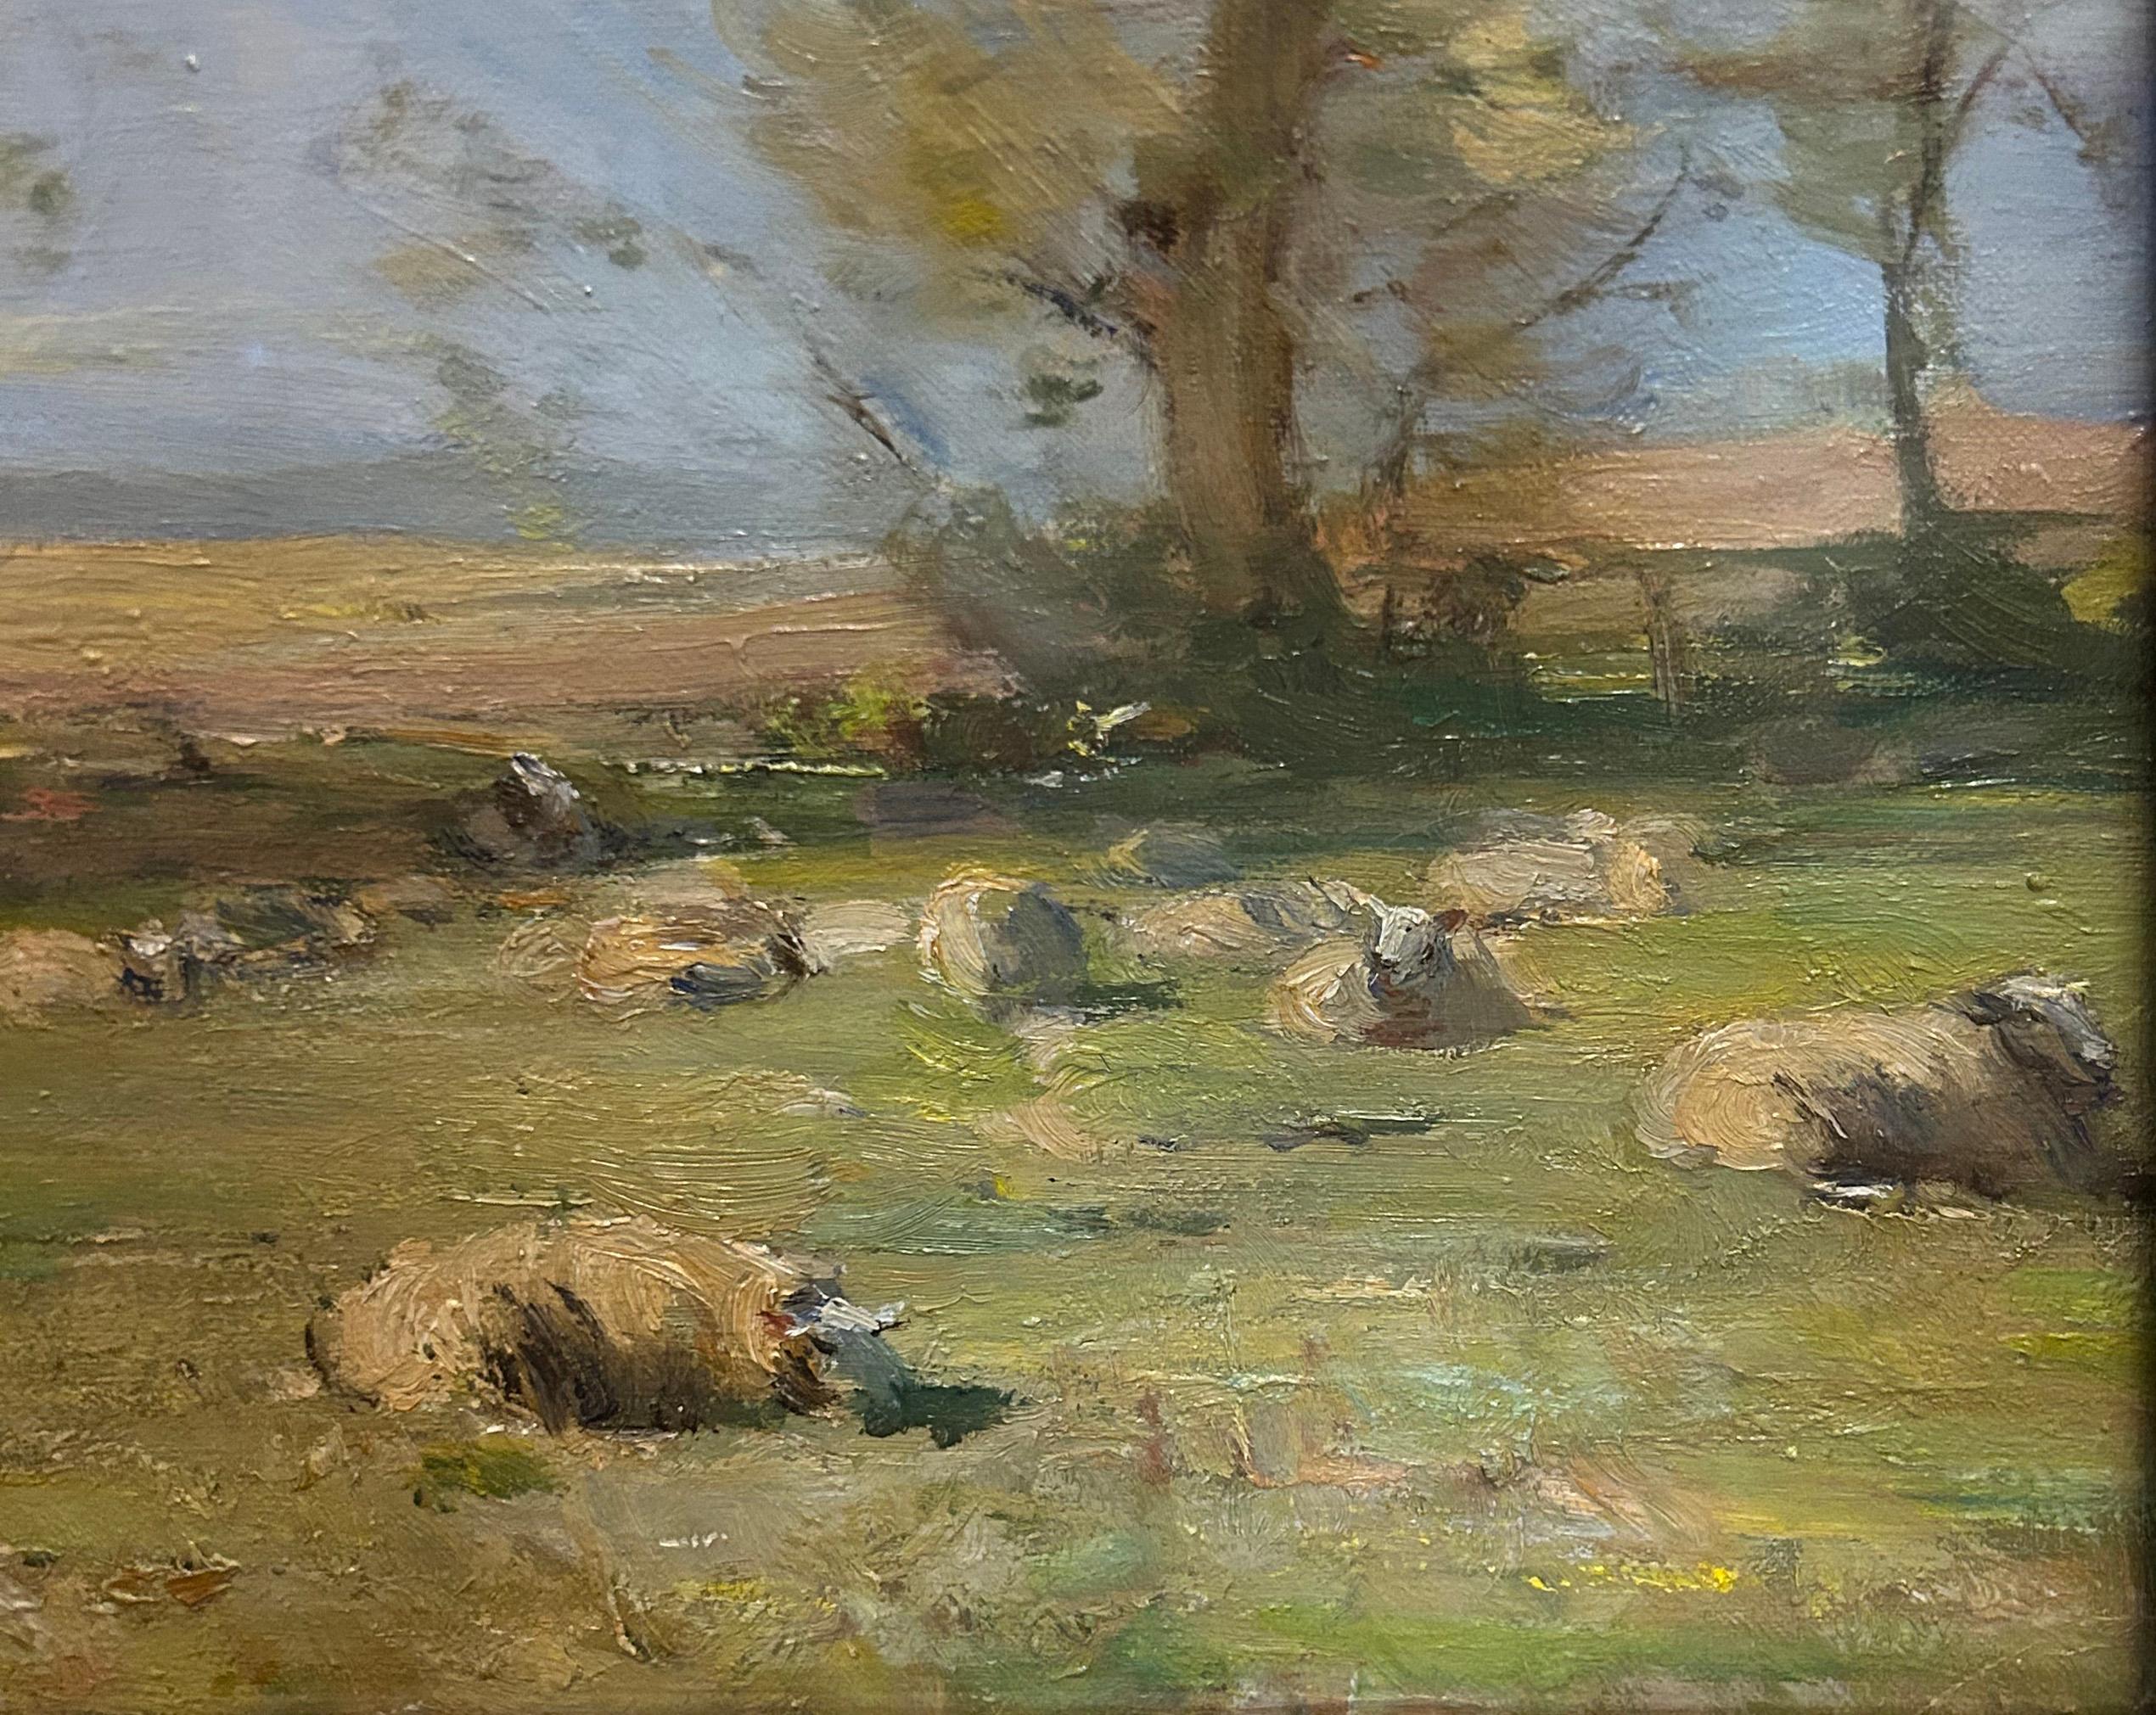 A Summer’s Day by William Miller Frazer (1864-1961) depicts a tranquil countryside scene of sheep grazing and resting. Frazer’s sheep find numerous ways to enjoy the pleasantries of a prospering field. Several luscious, green trees occupy the